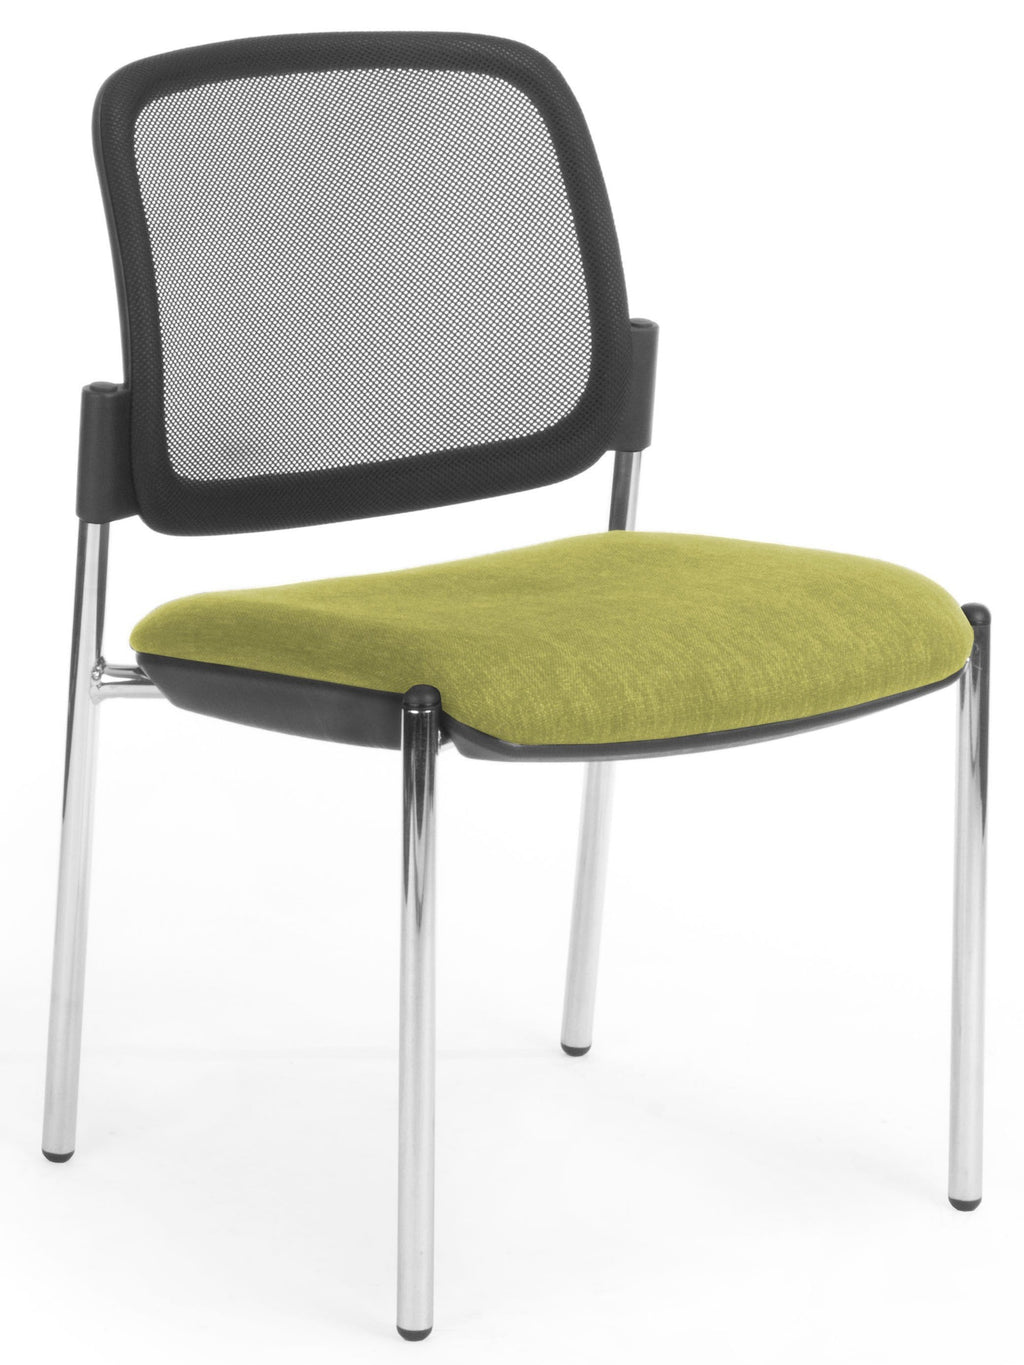 Venice Mesh 4 Leg Chair Without Arms